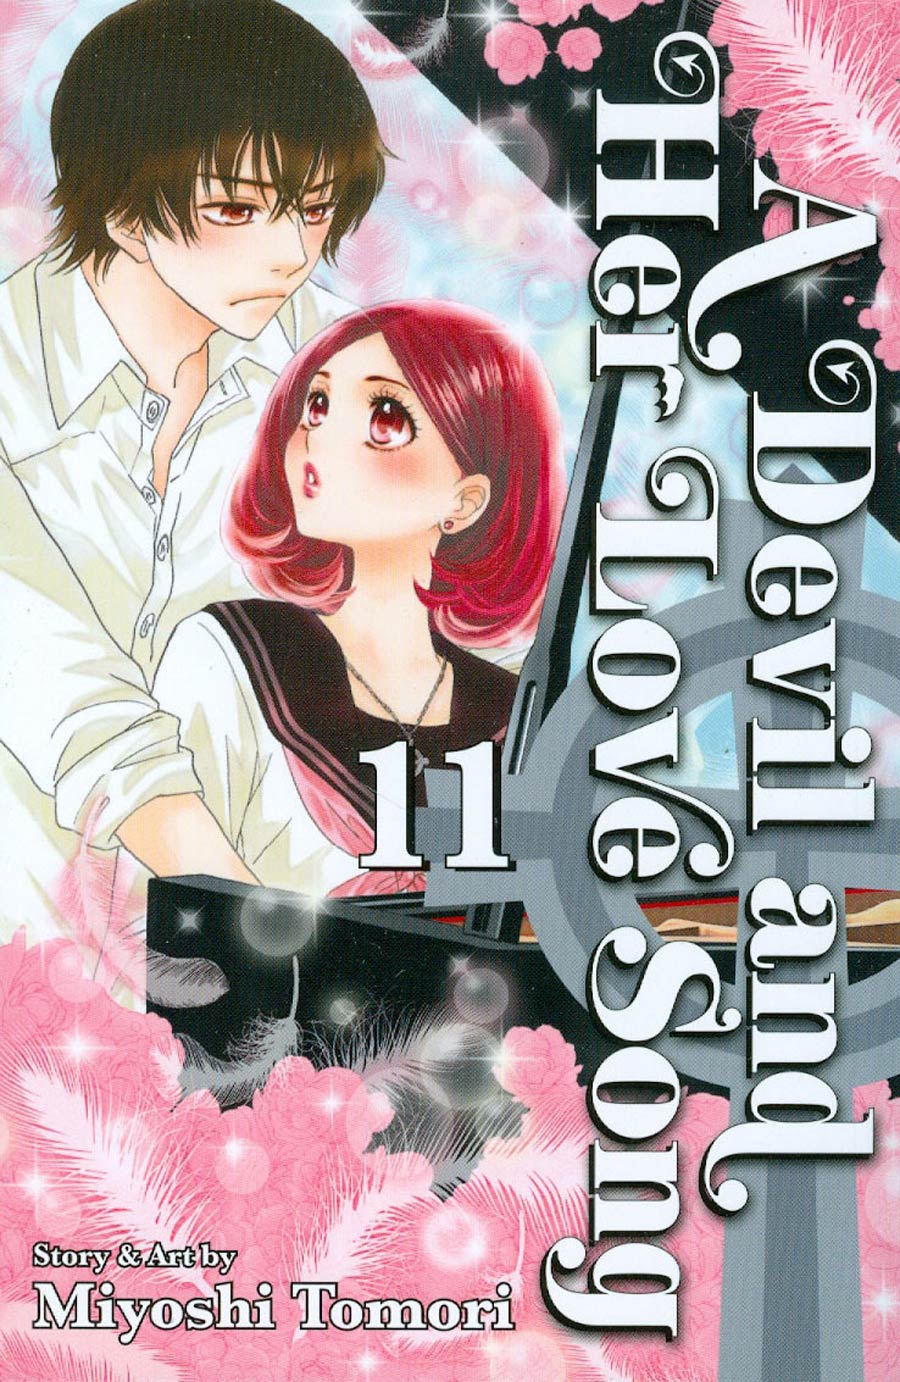 Devil And Her Love Song Vol 11 TP